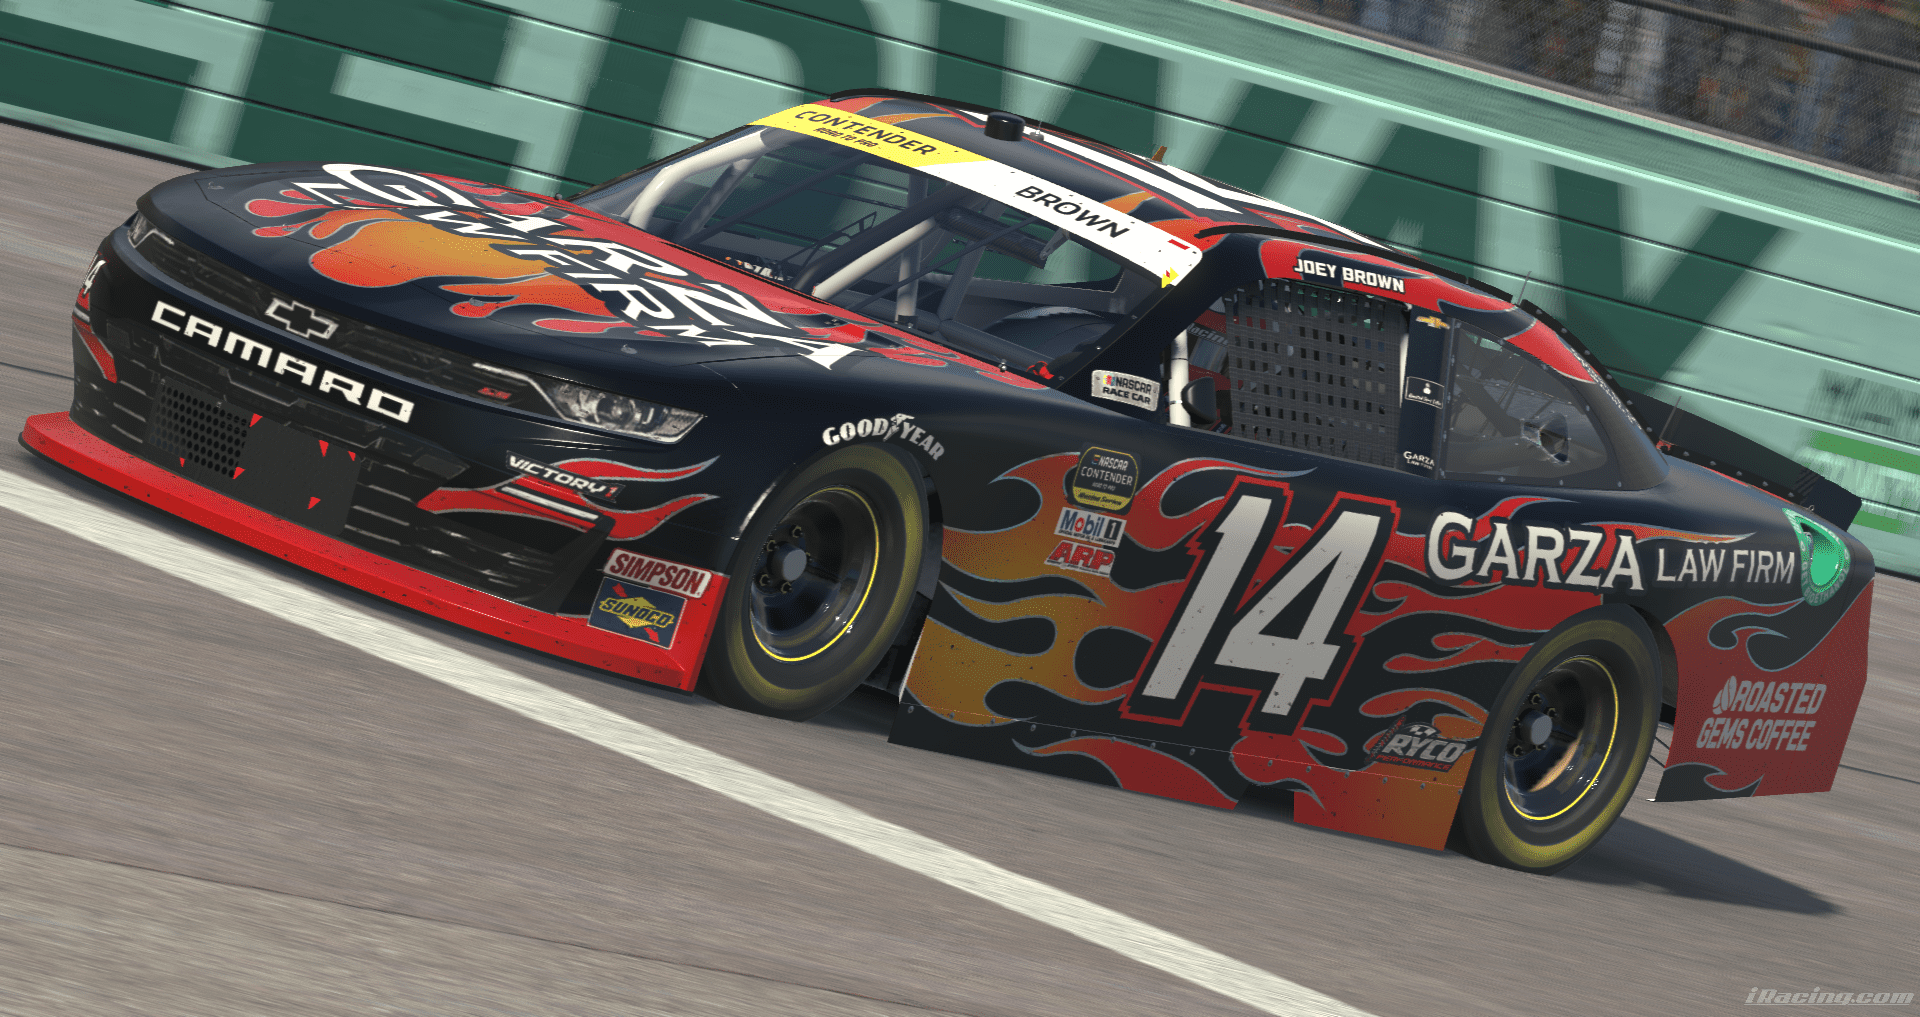 Joey Brown wins the eNASCAR Contender iRacing Series race at Homestead-Miami Speedway.